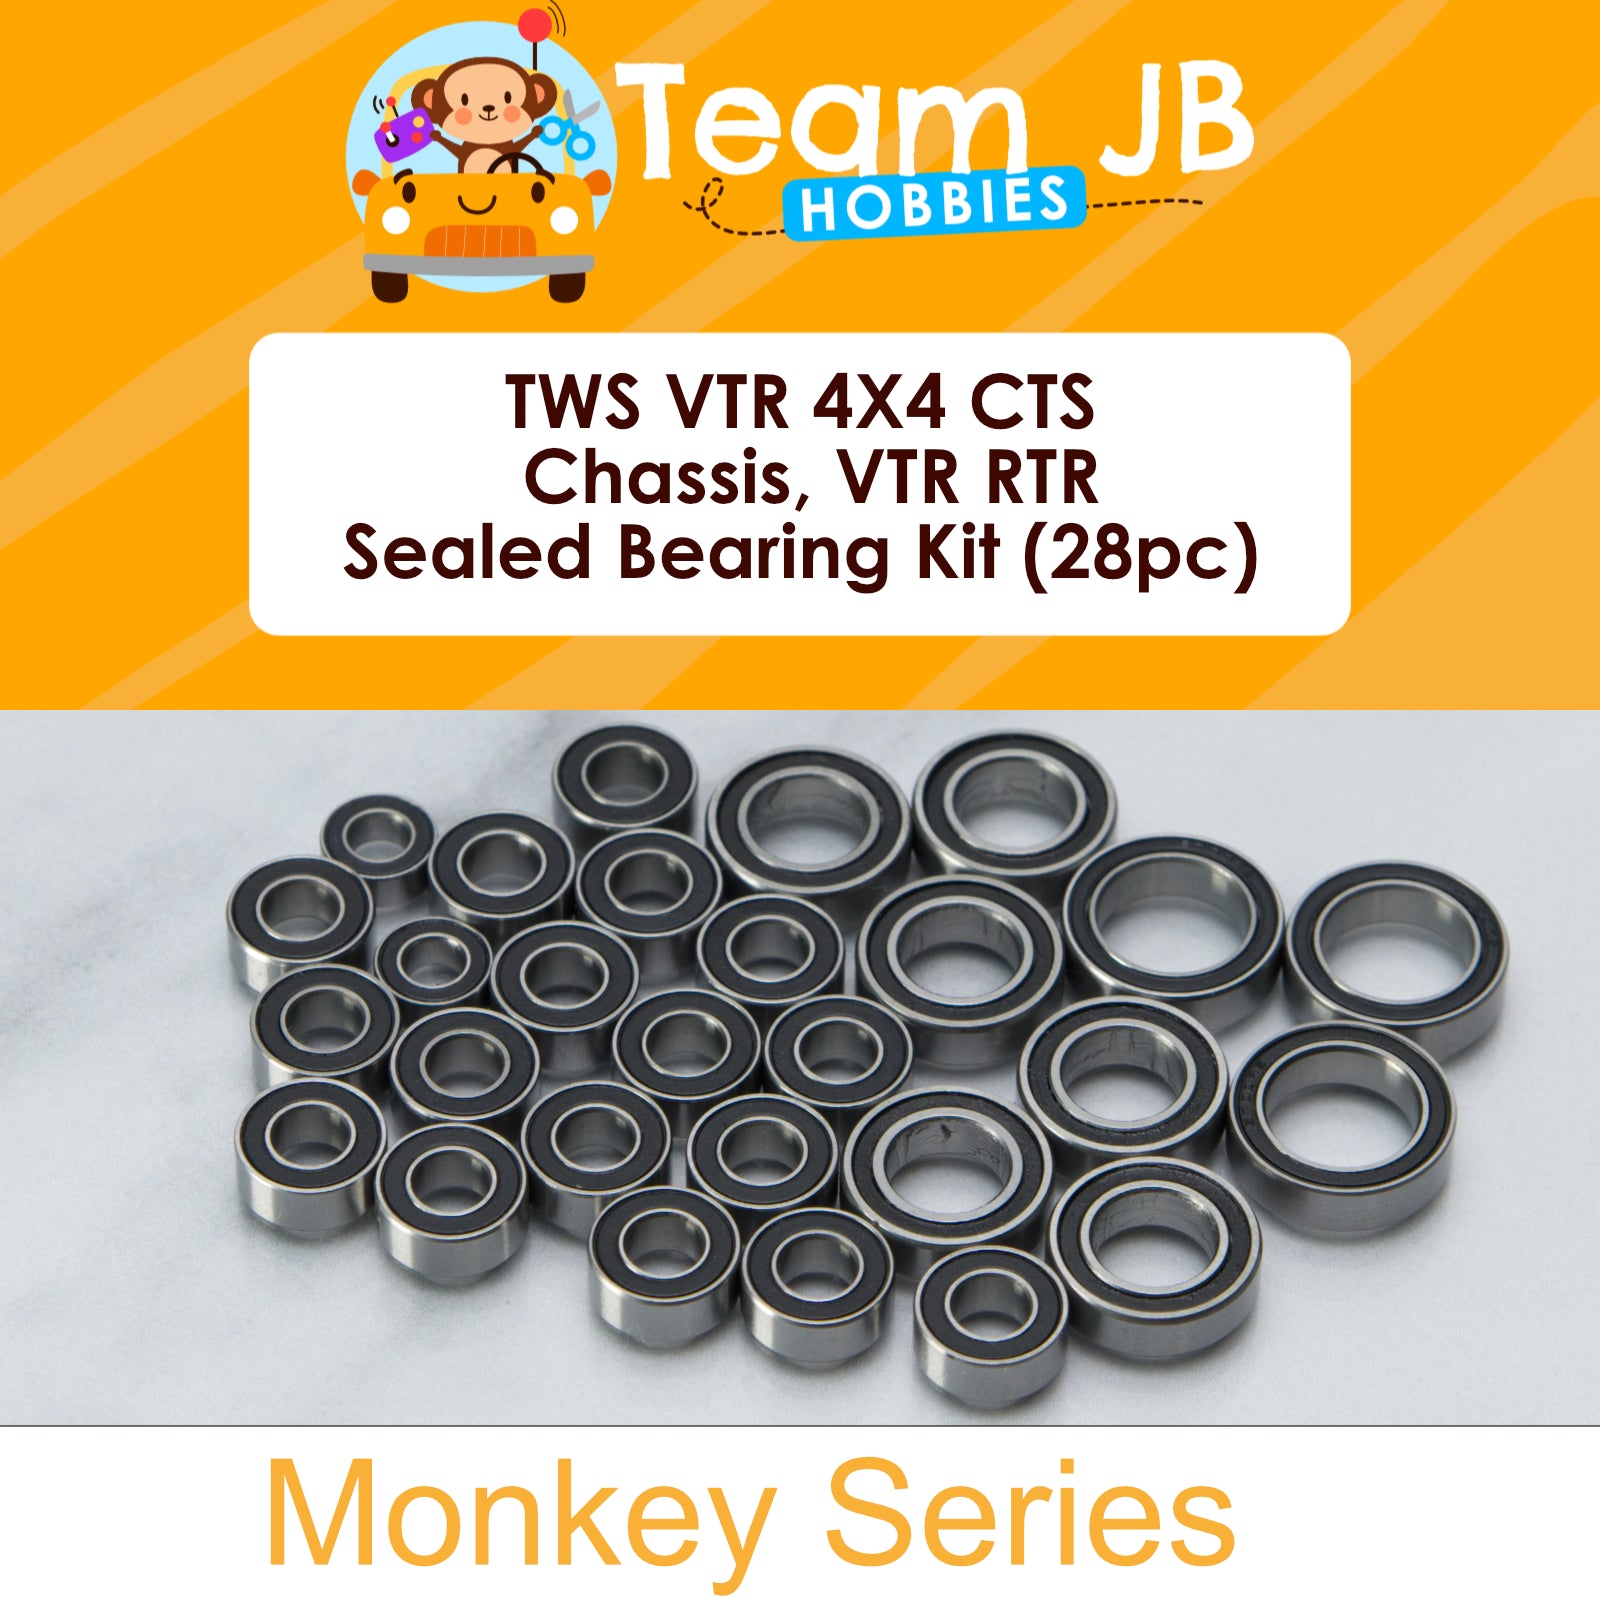 TWS VTR 4X4 CTS Chassis, VTR RTR - Sealed Bearing Kit